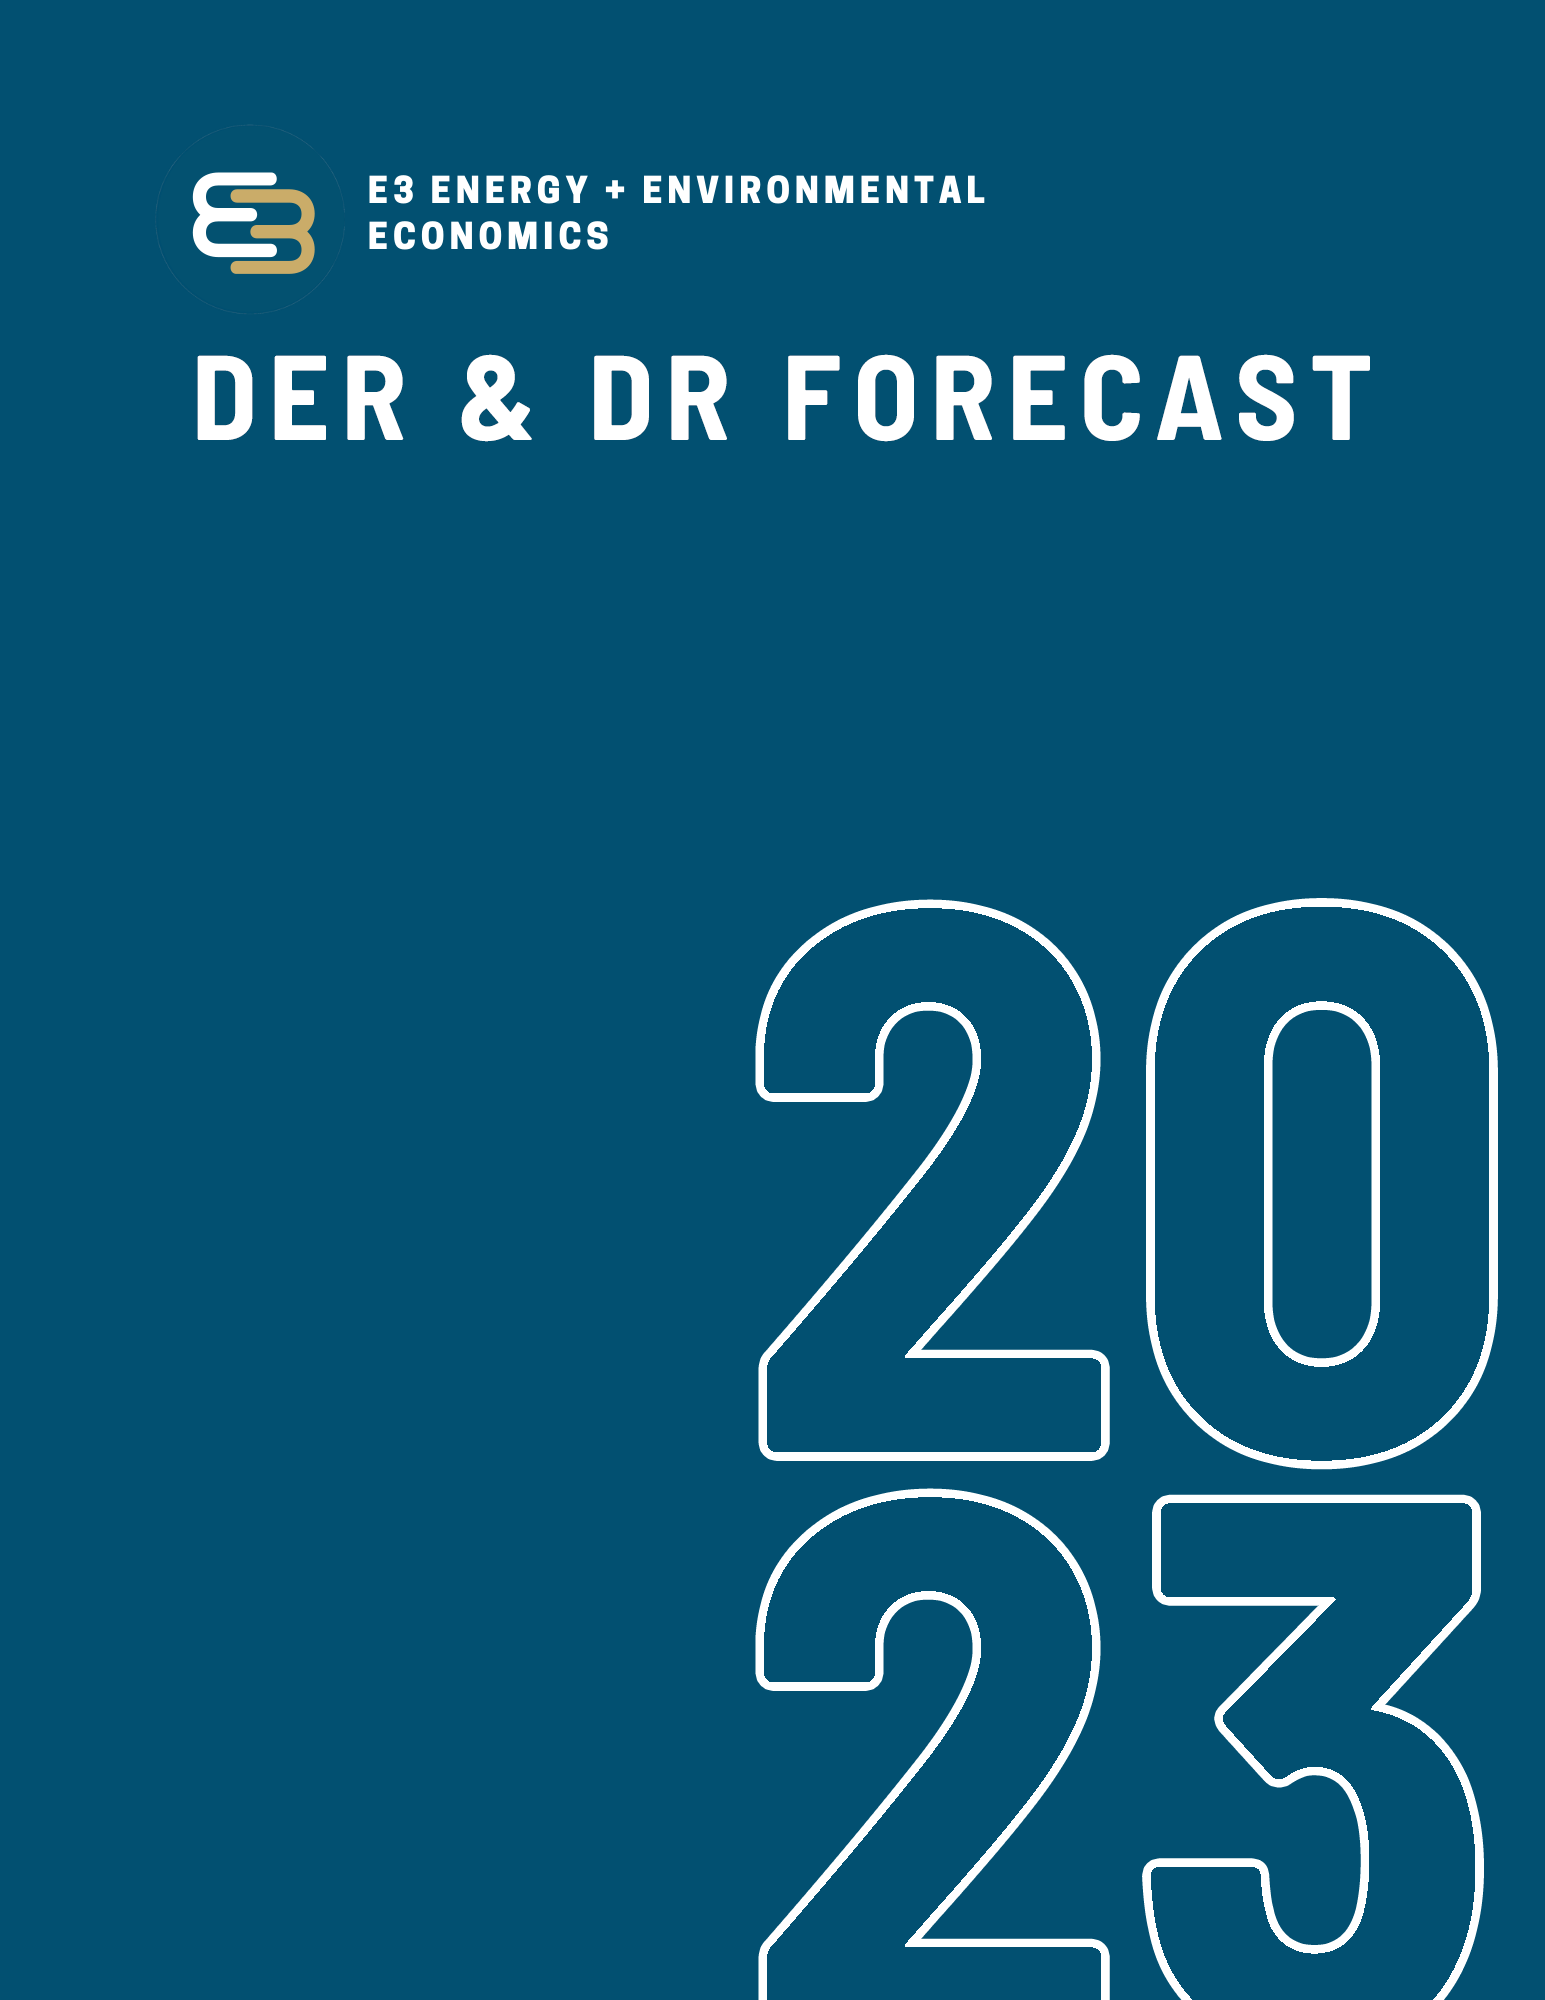 Distributed Energy Resource (DER), Demand Response (DR), and Retail Rate Forecast